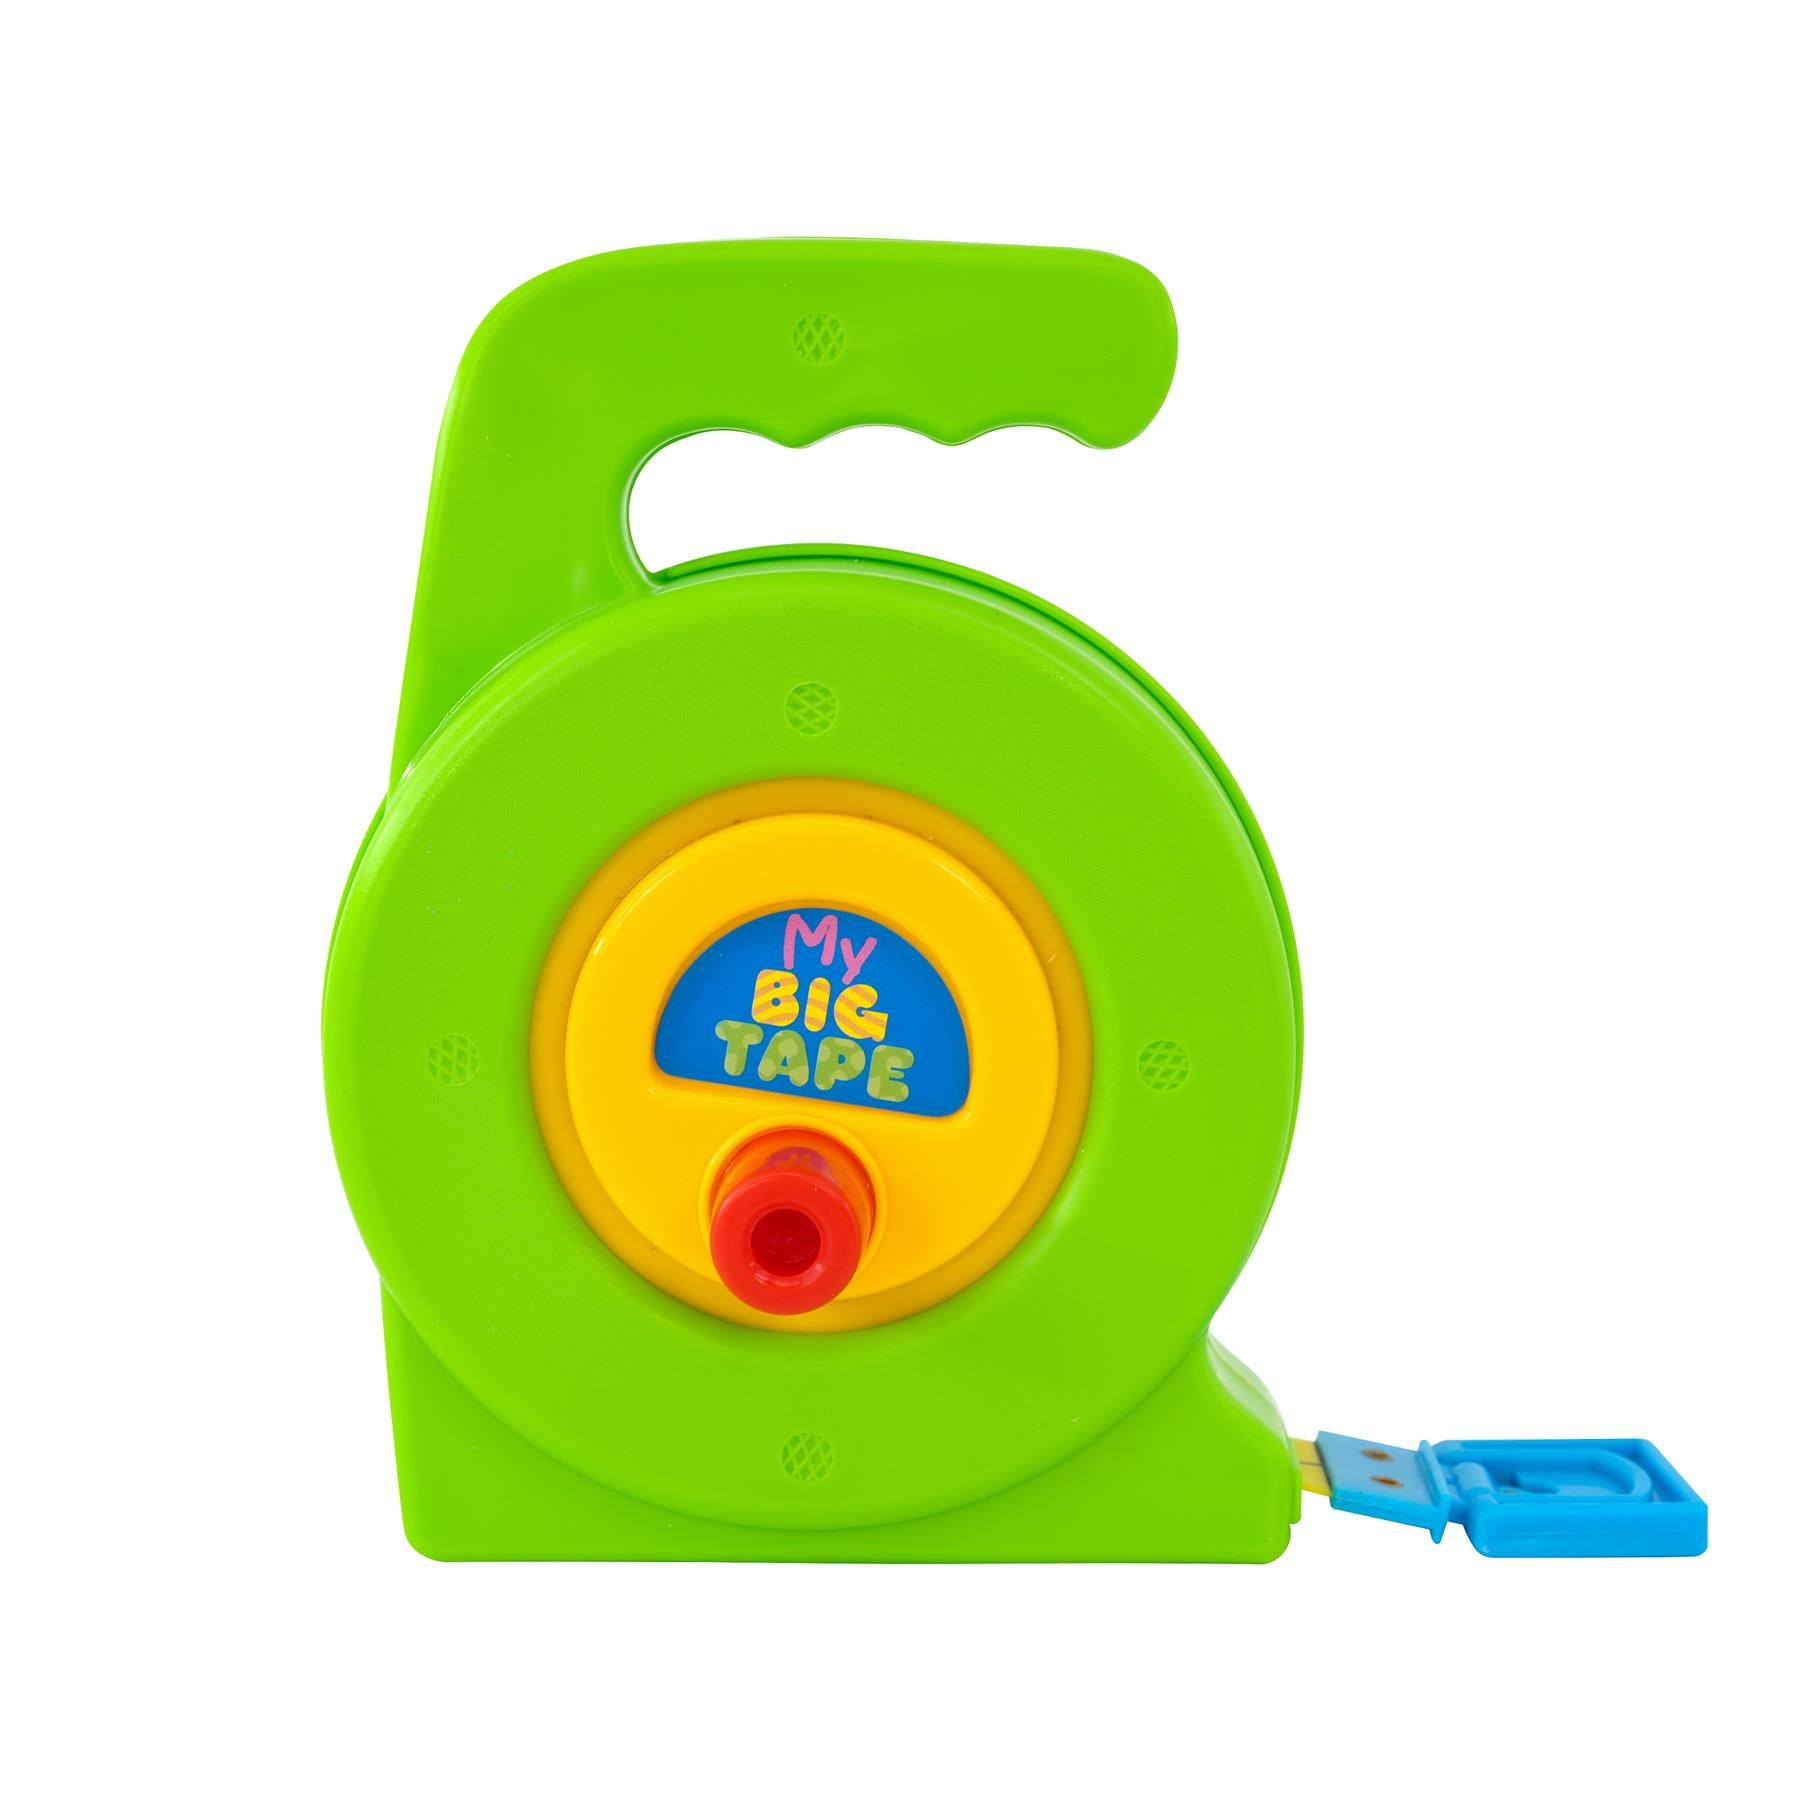 Tape Measure Toy by The Magic Toy Shop - The Magic Toy Shop